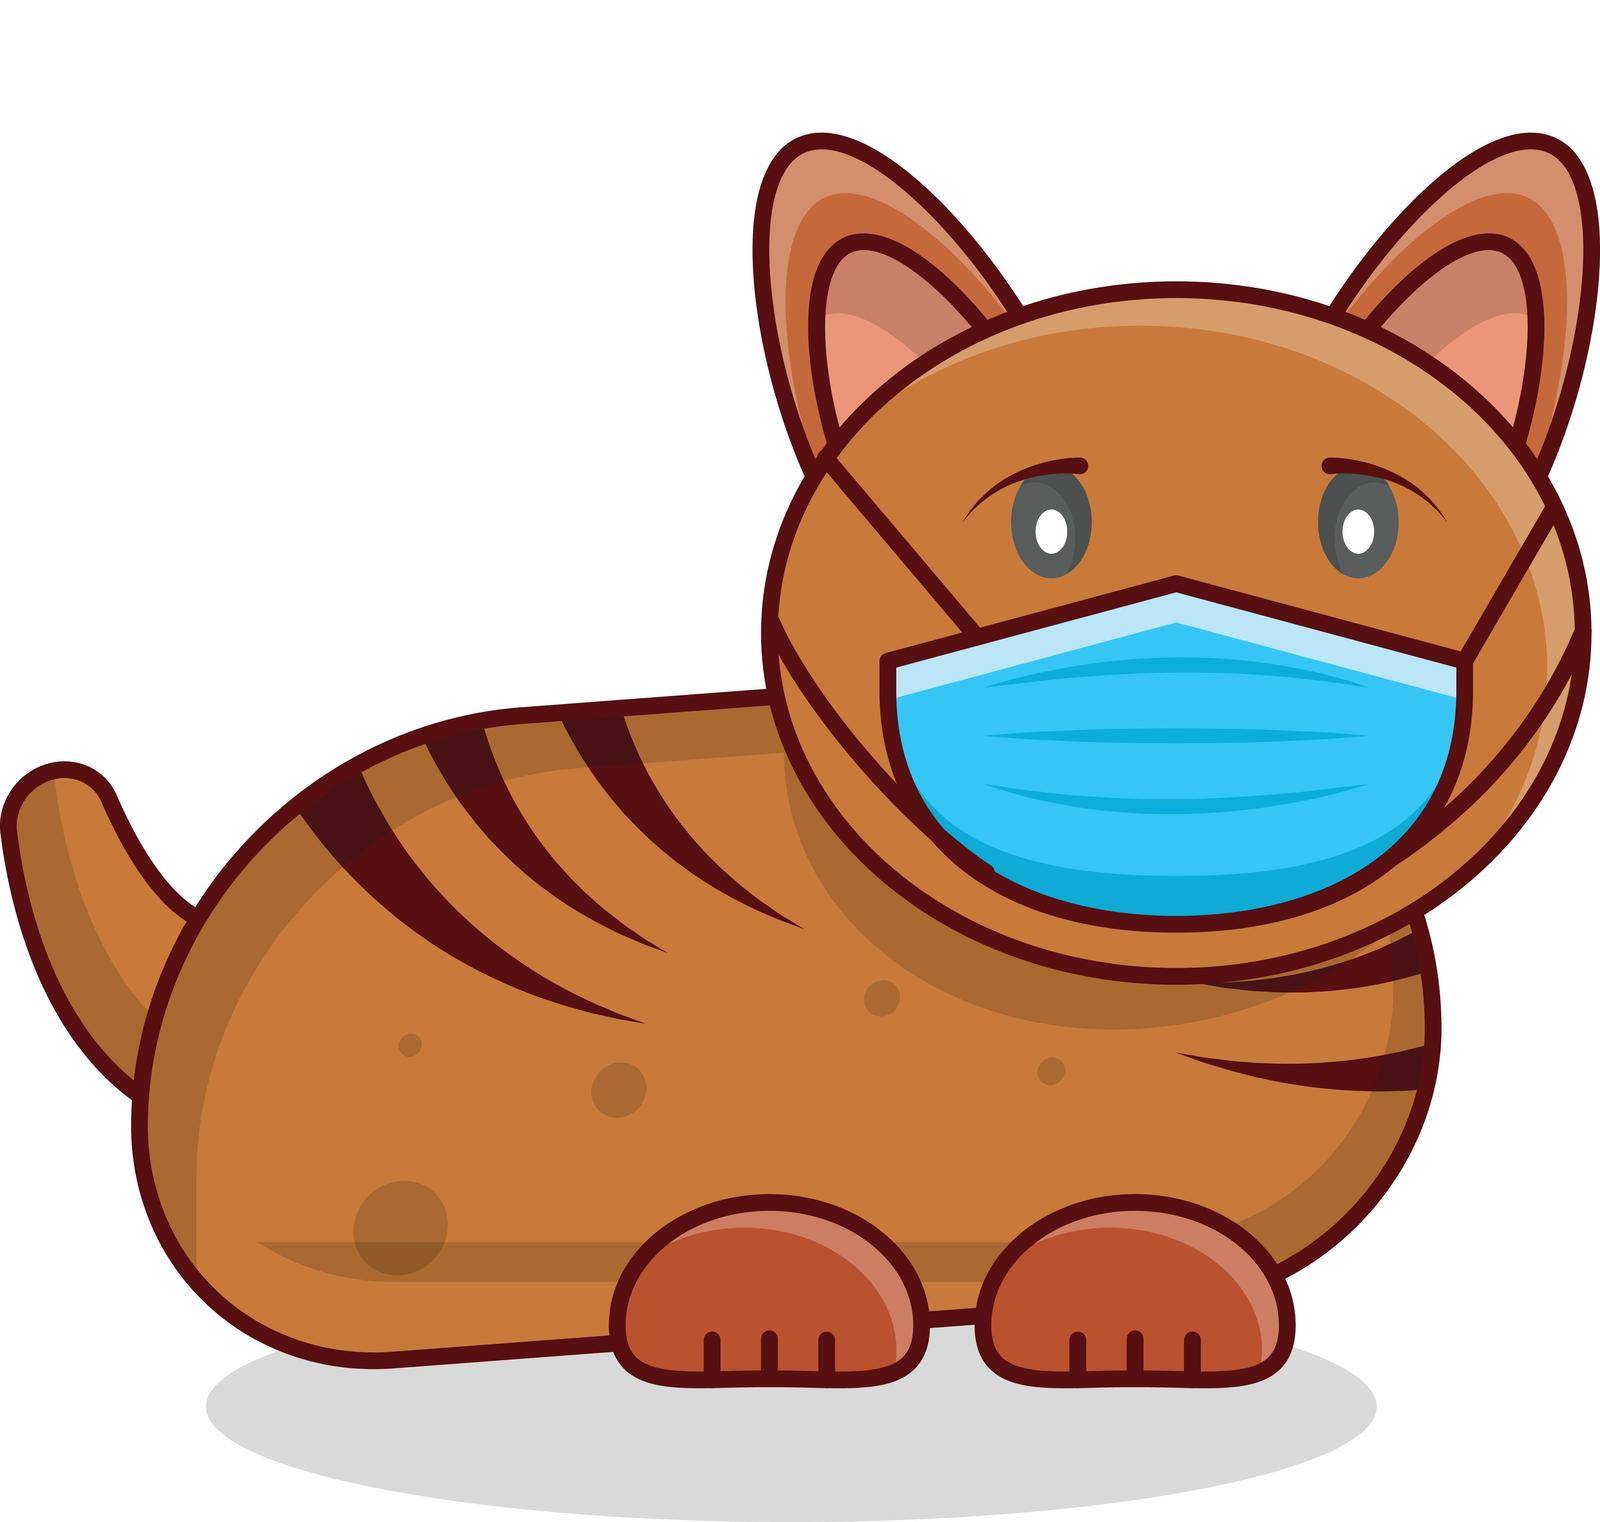 cat mask Vector illustration on a transparent background.Premium quality symmbols. vector line flat icon for concept and graphic design.